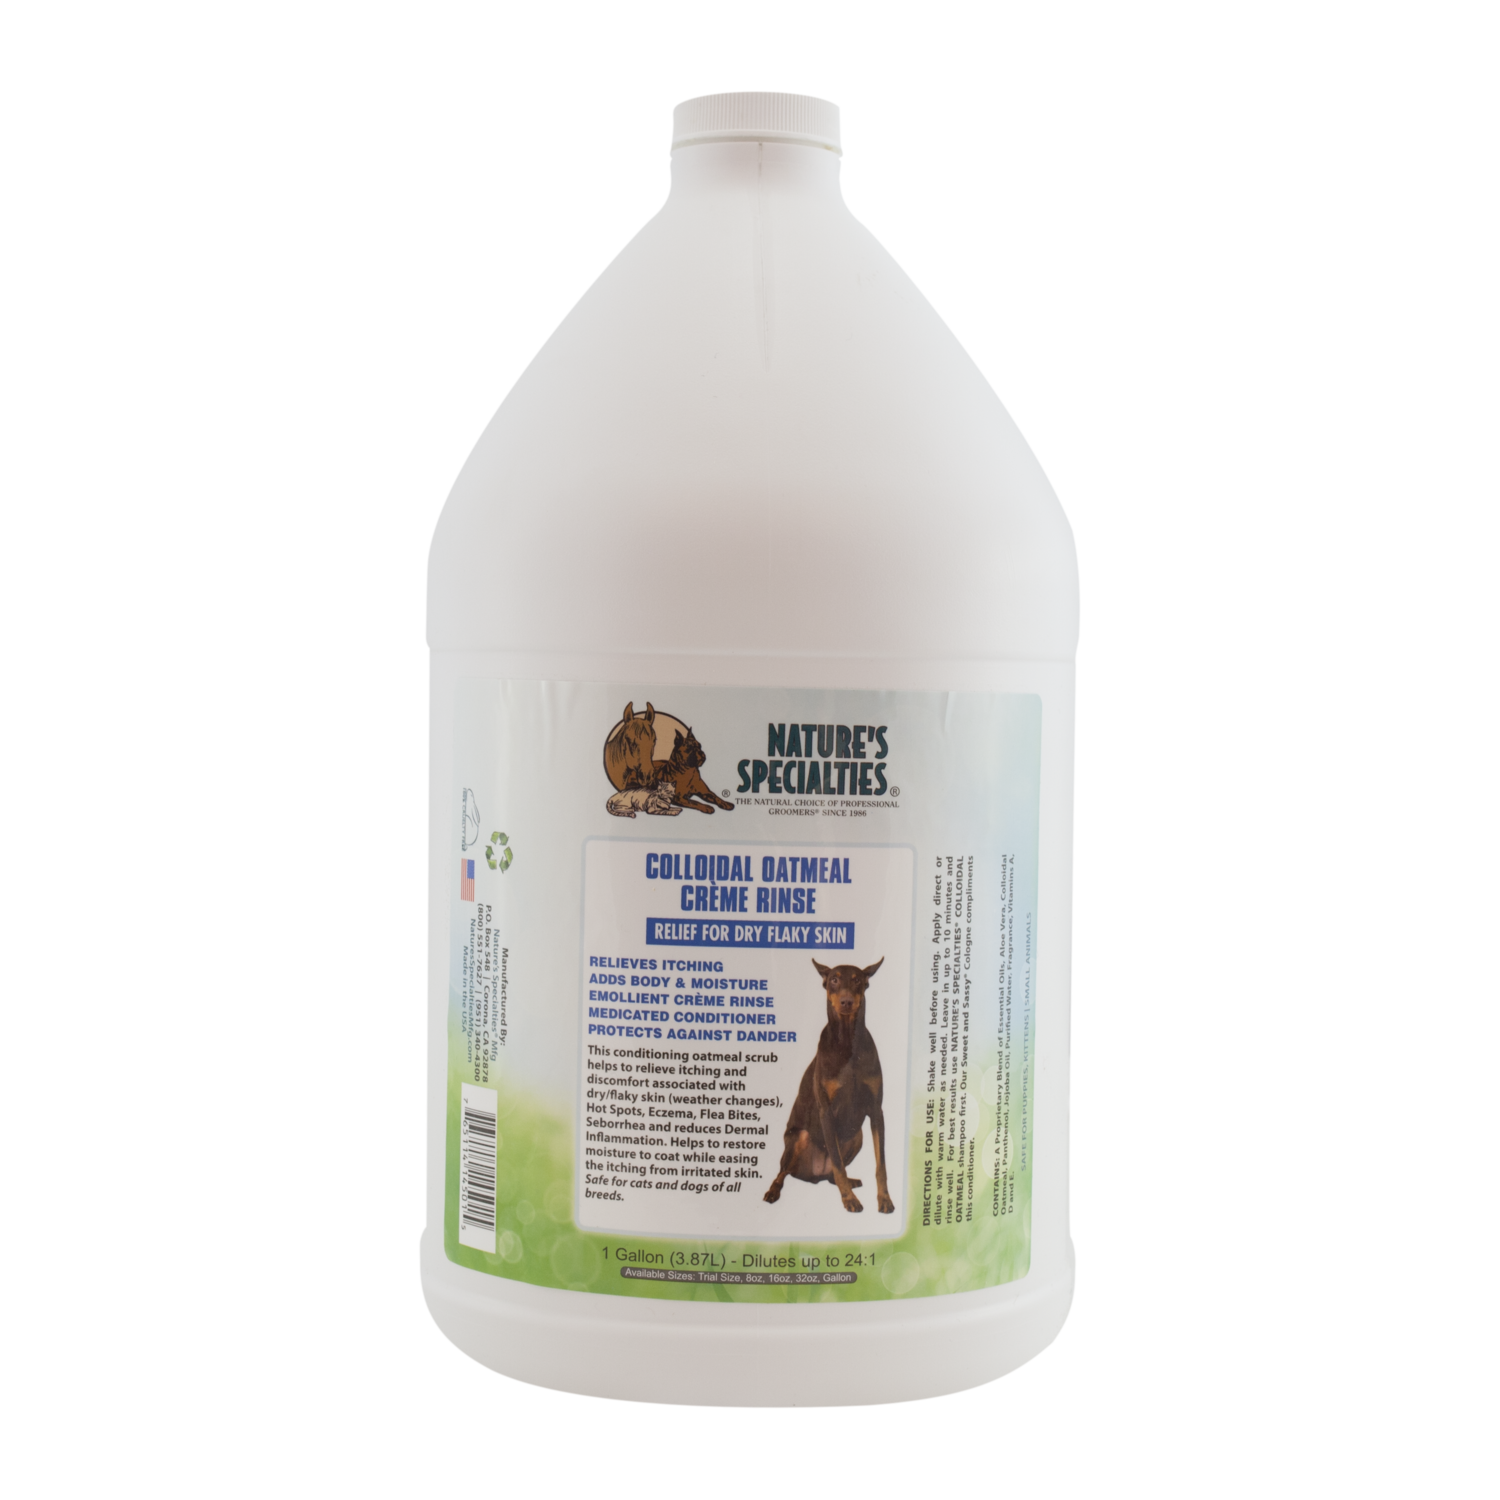 Colloidal Oatmeal Creme Rinse — Animal Care Products